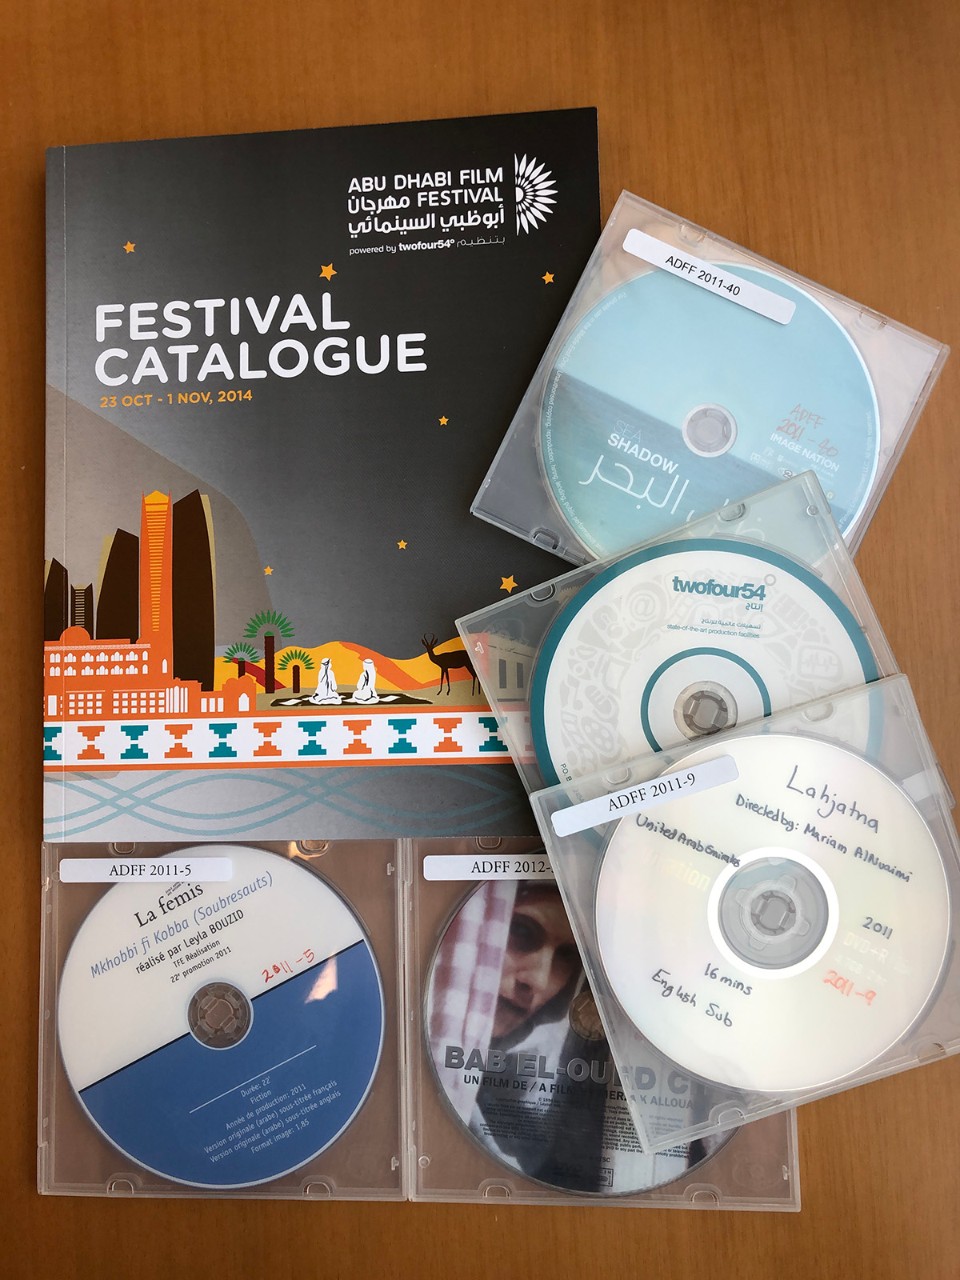 A sample of the Cimena and Filmmaking Collection from the NYU Abu Dhabi Library's Archives and Special Collections, featuring a film festival catalog and several DVDs.